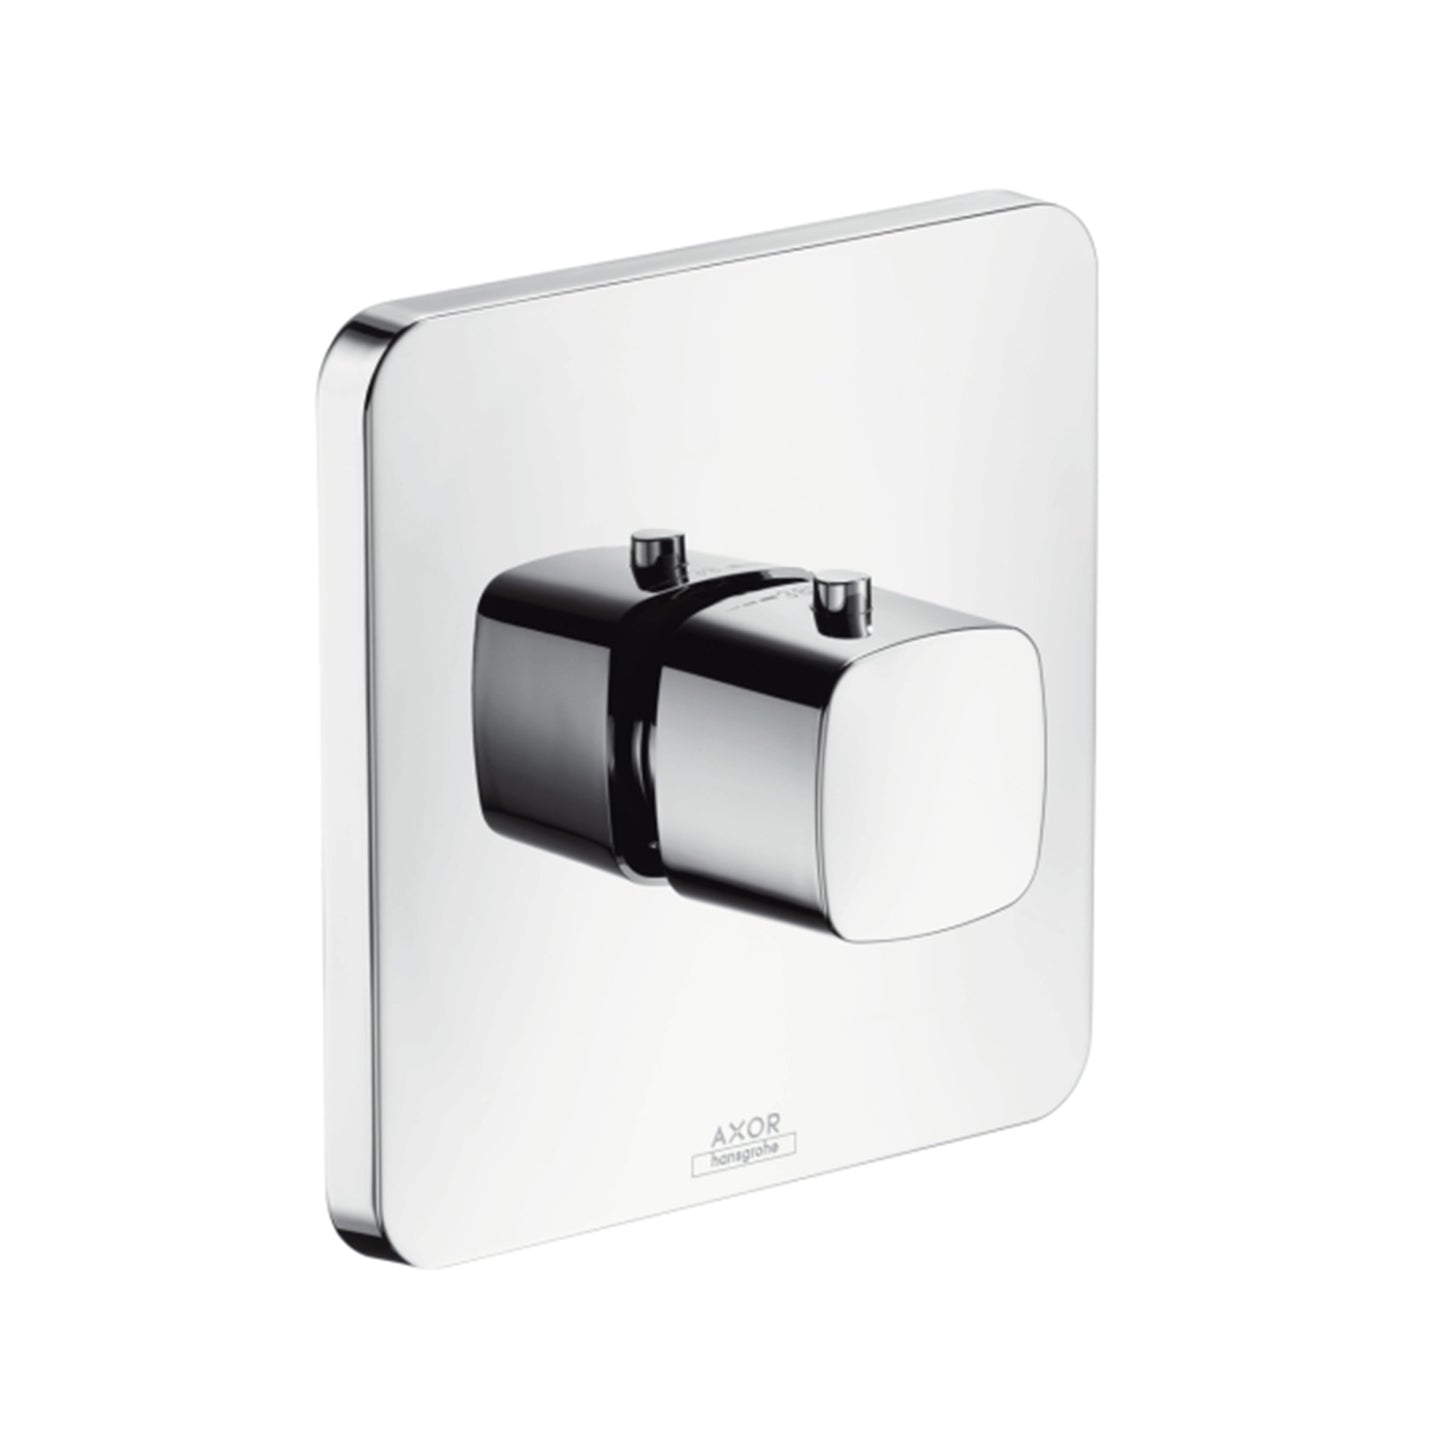 Axor Urquiola Finish set for concealed thermostatic highflow mixer, Chrome 11731.000.